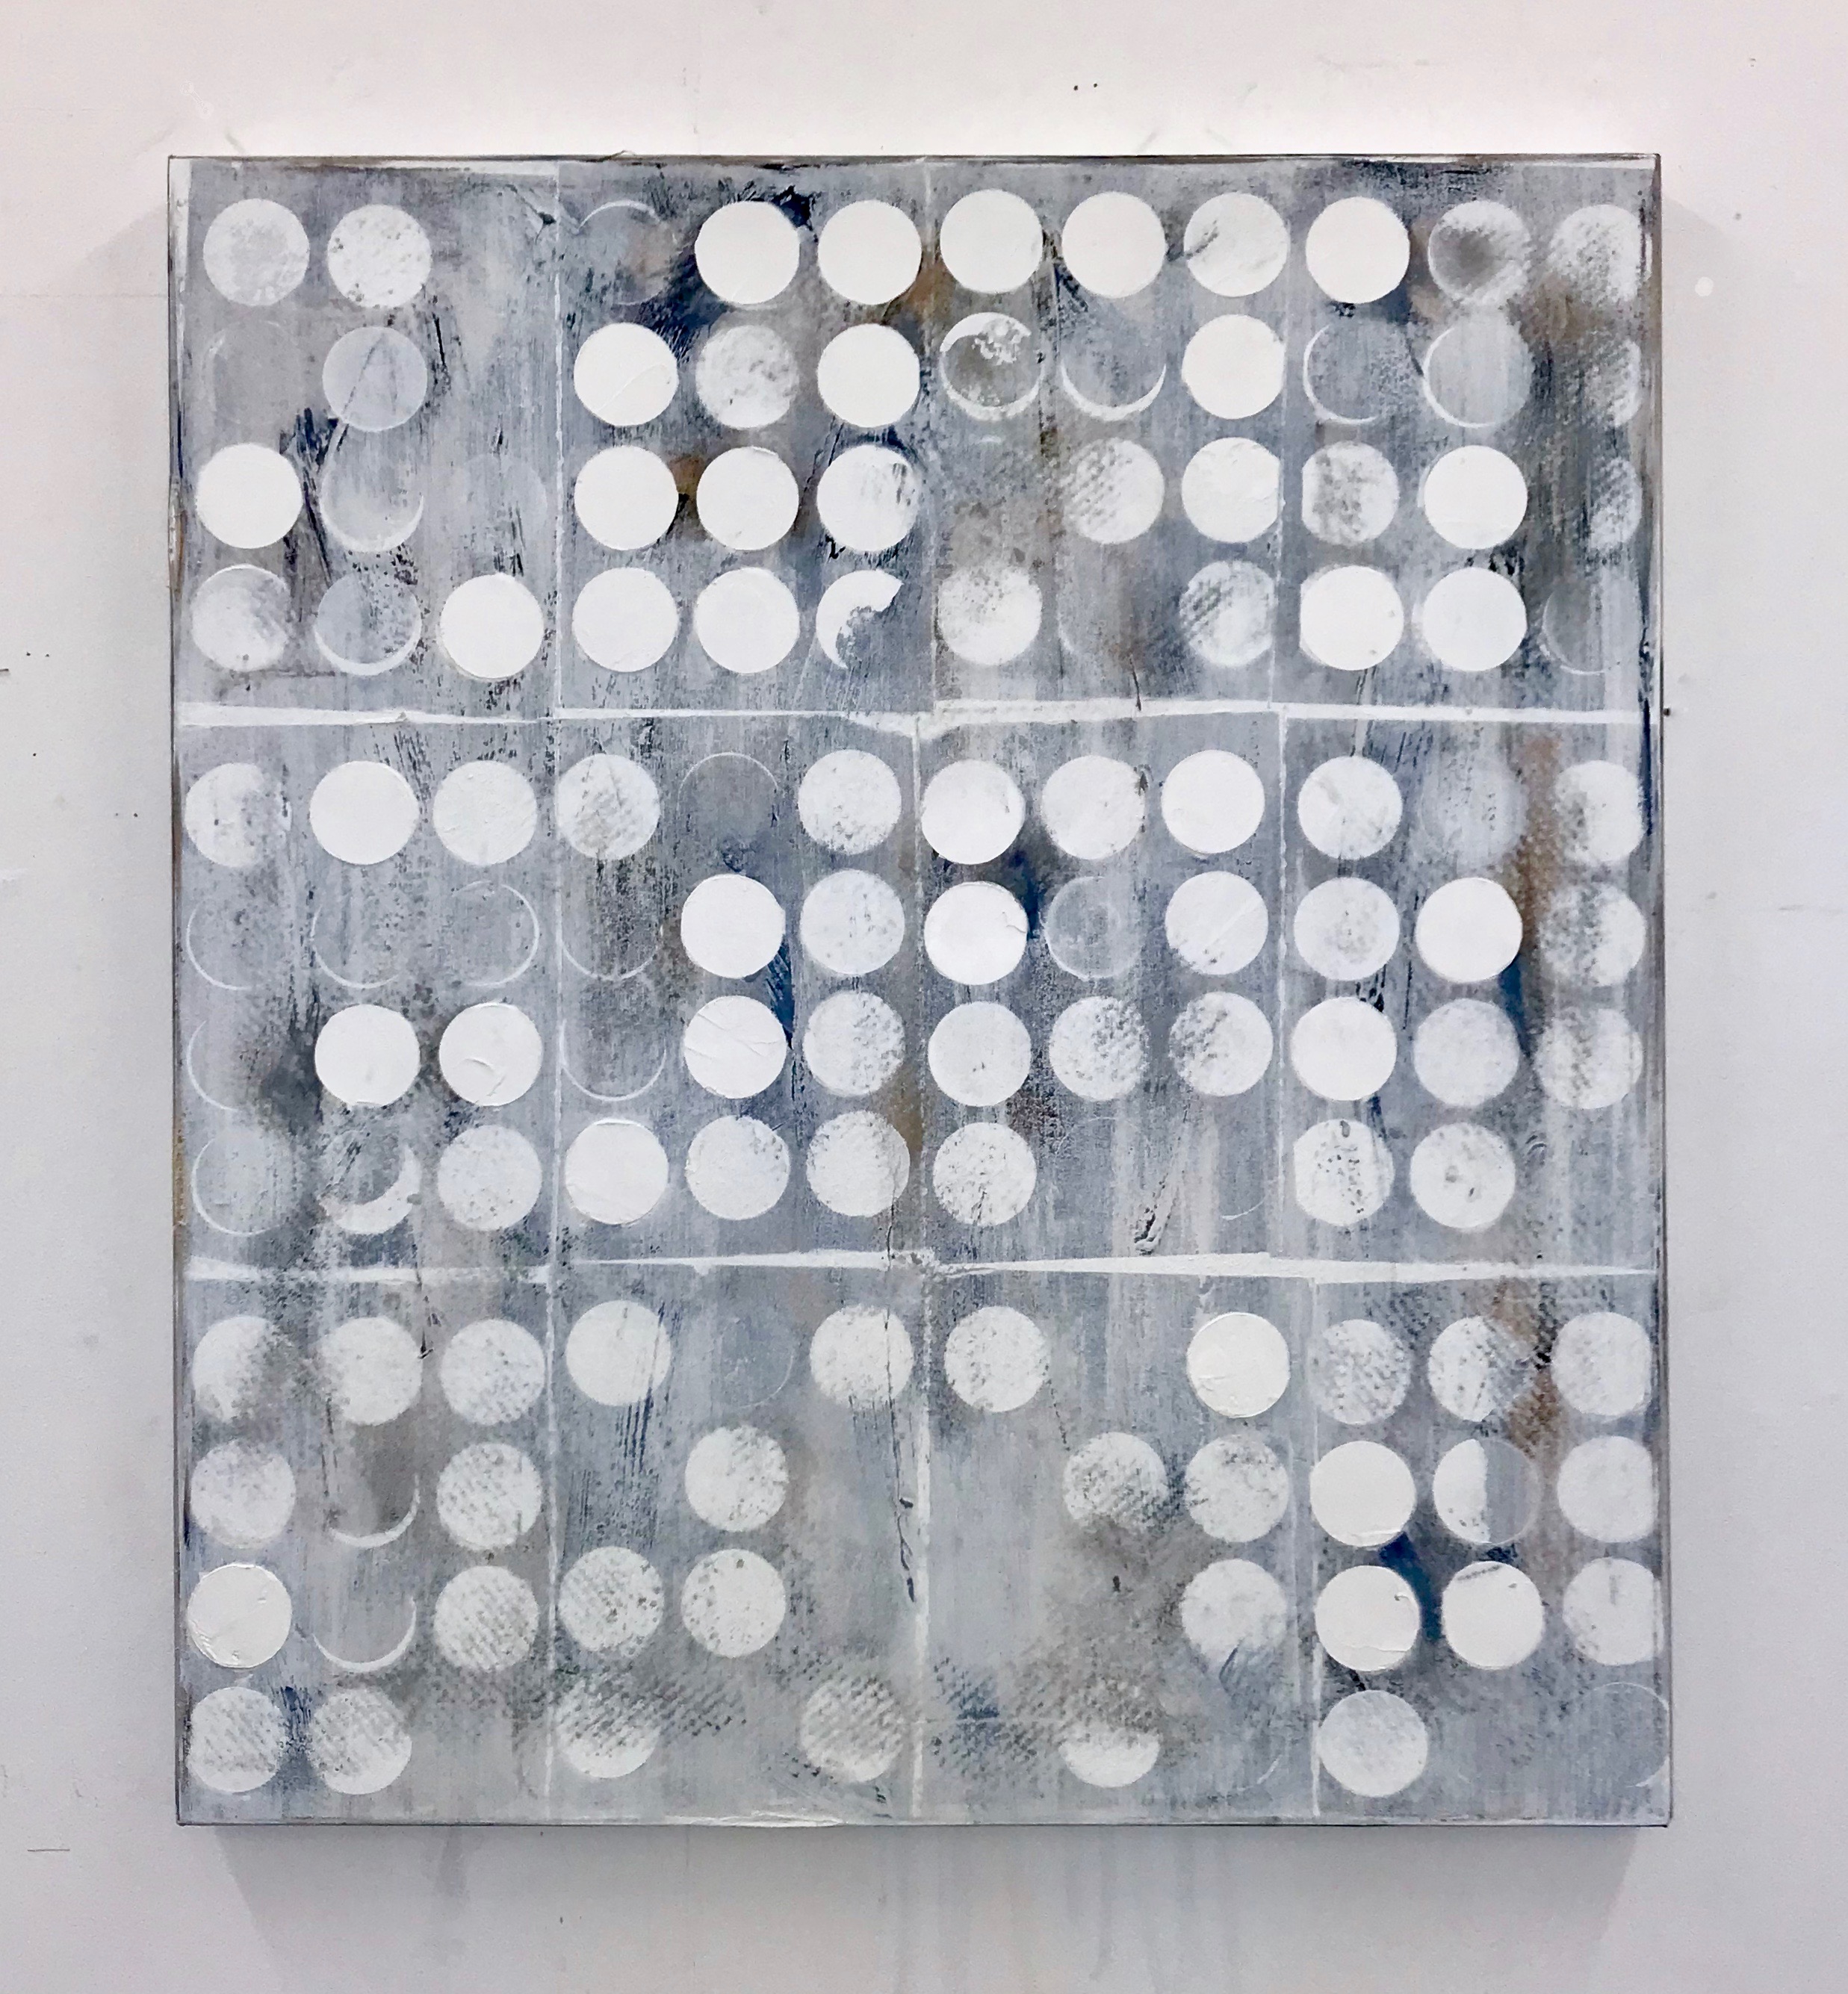 Untitled (silver circles)